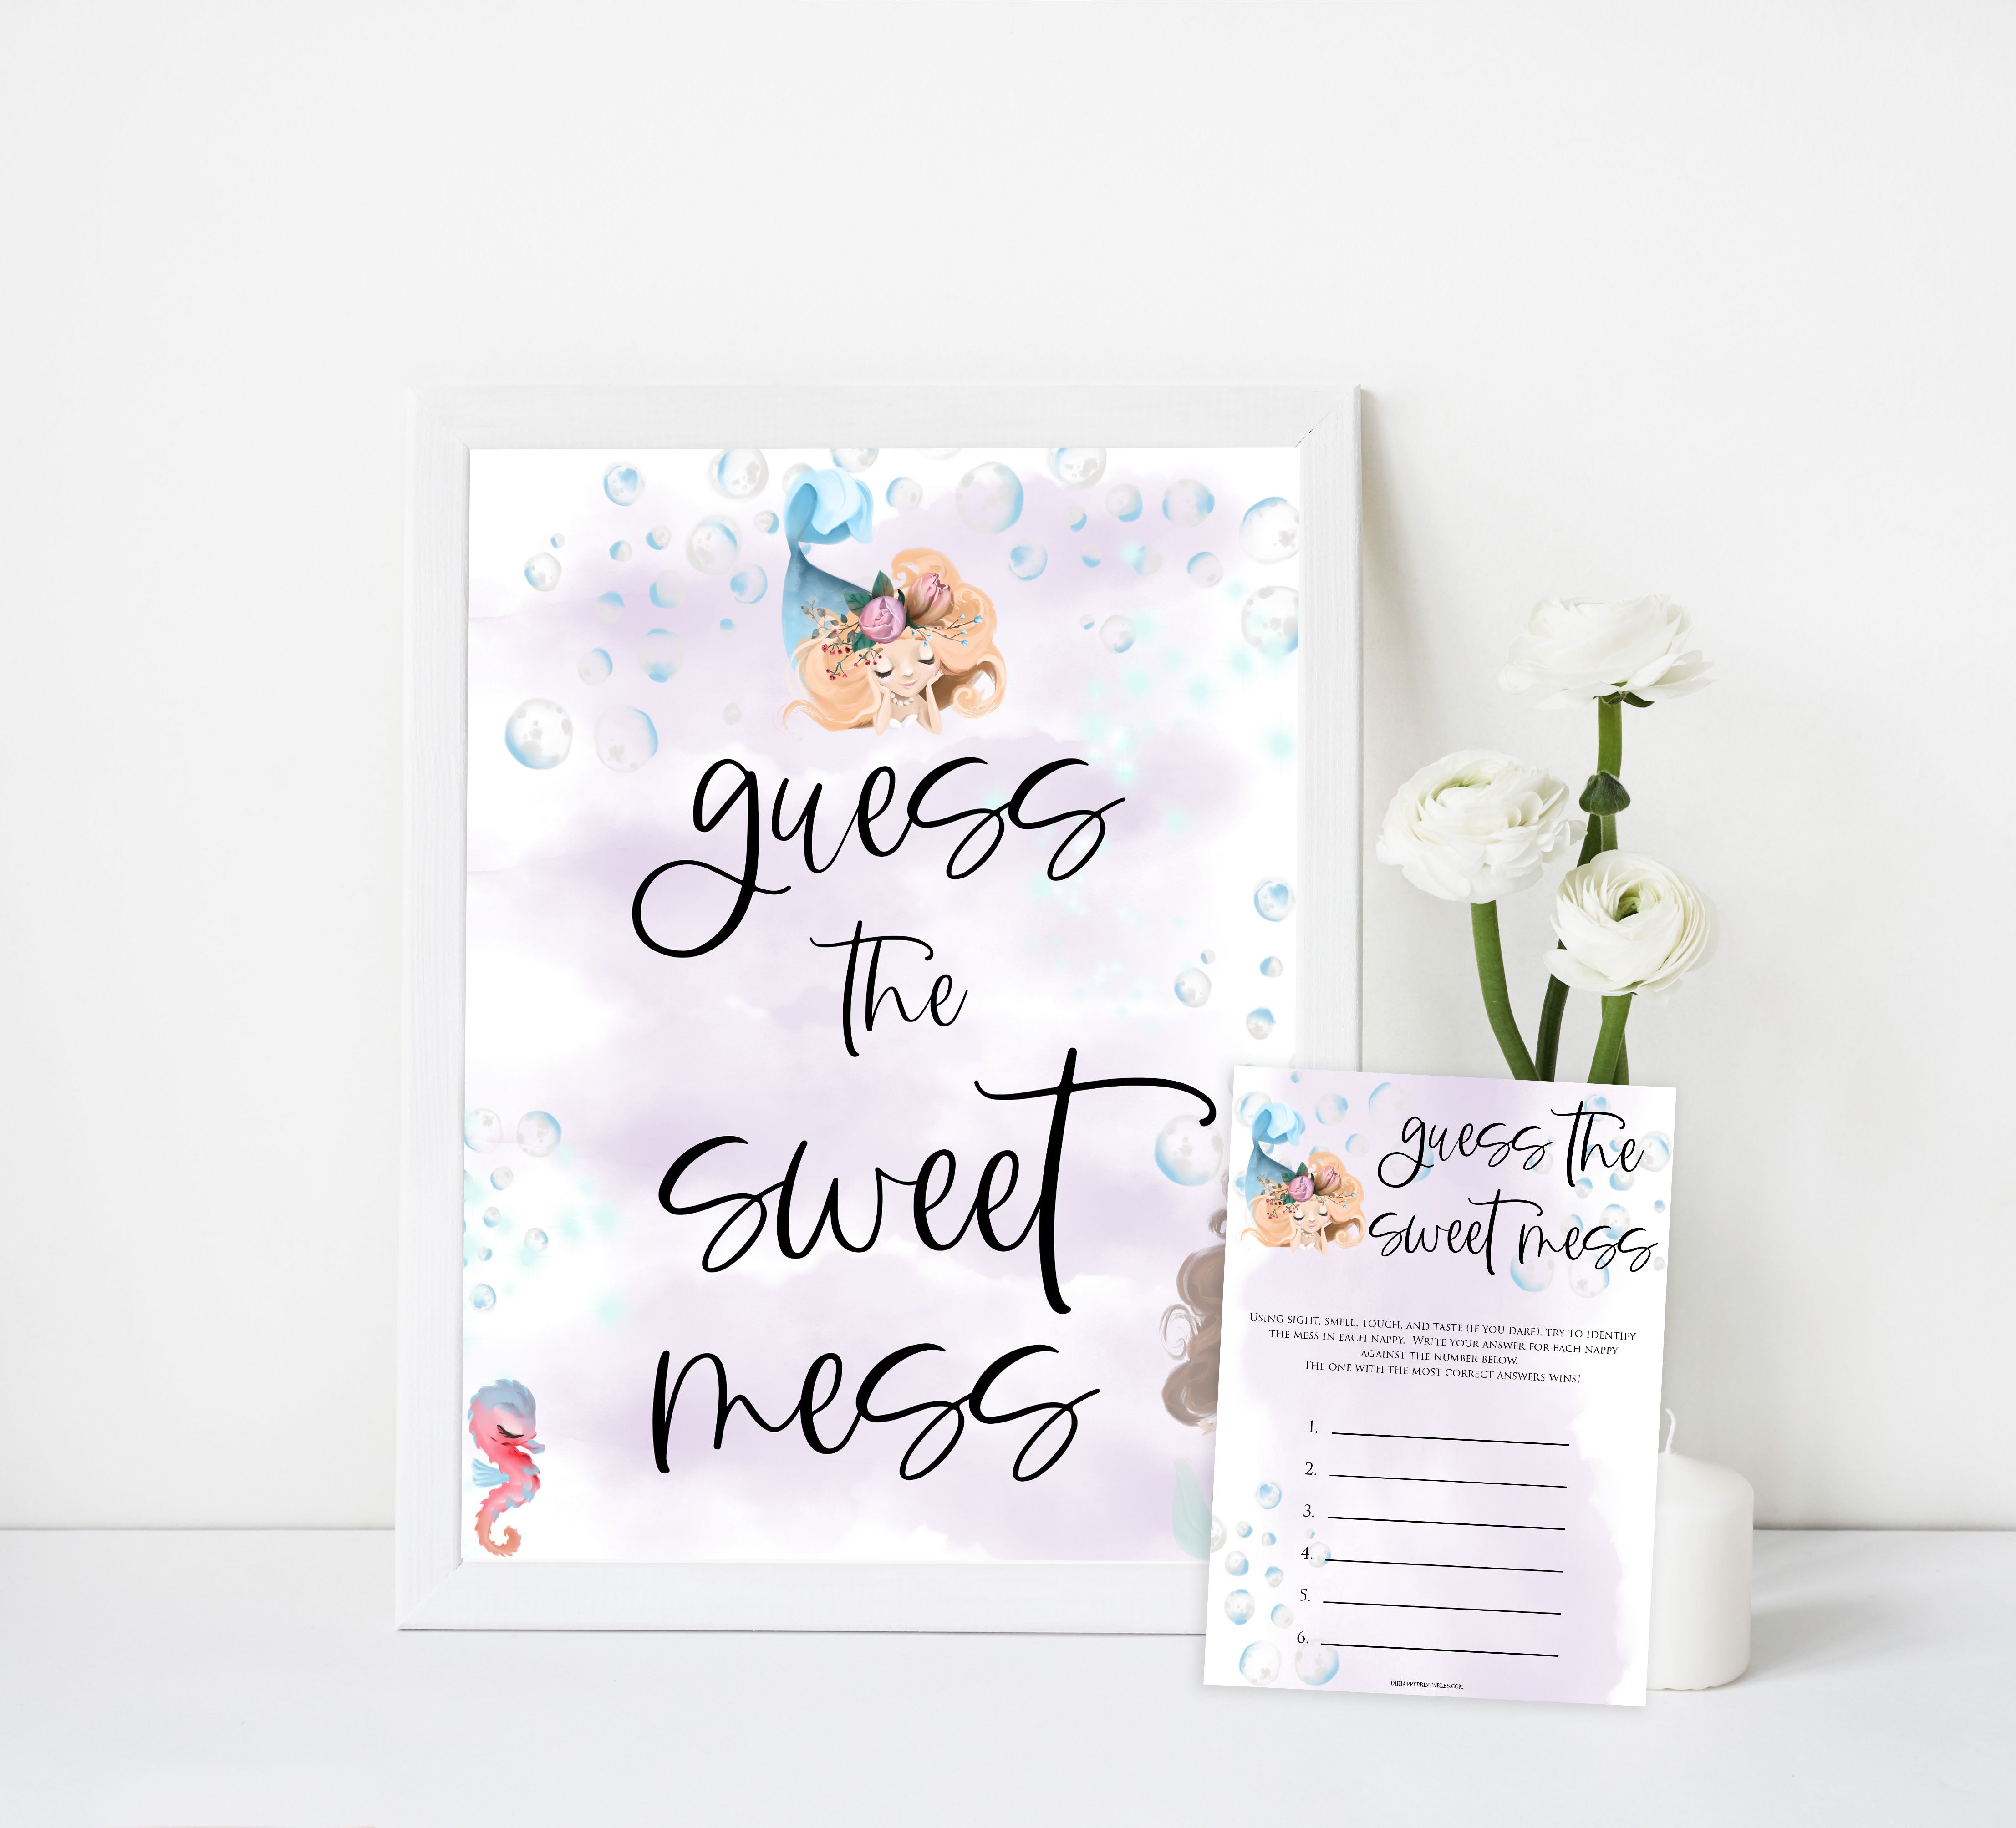 Guess the sweet mess baby game, Printable baby shower games, little mermaid baby games, baby shower games, fun baby shower ideas, top baby shower ideas, little mermaid baby shower, baby shower games, pink hearts baby shower ideas